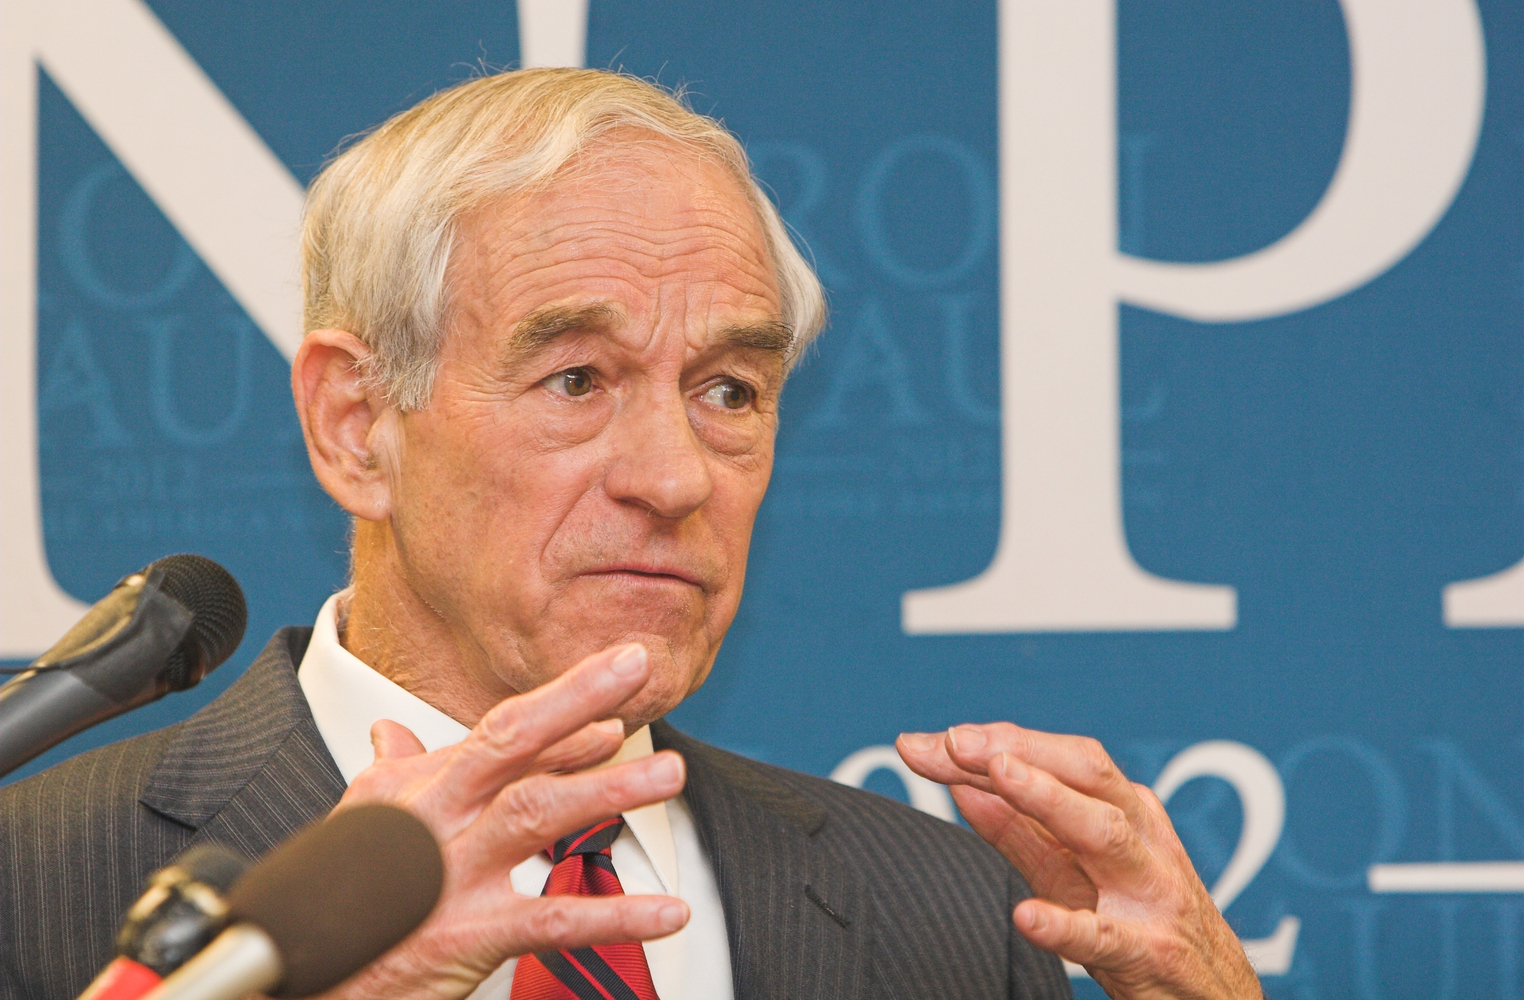 Ron Paul Slams 'Fednow' Payment System, Encourages Crypto Competition Instead